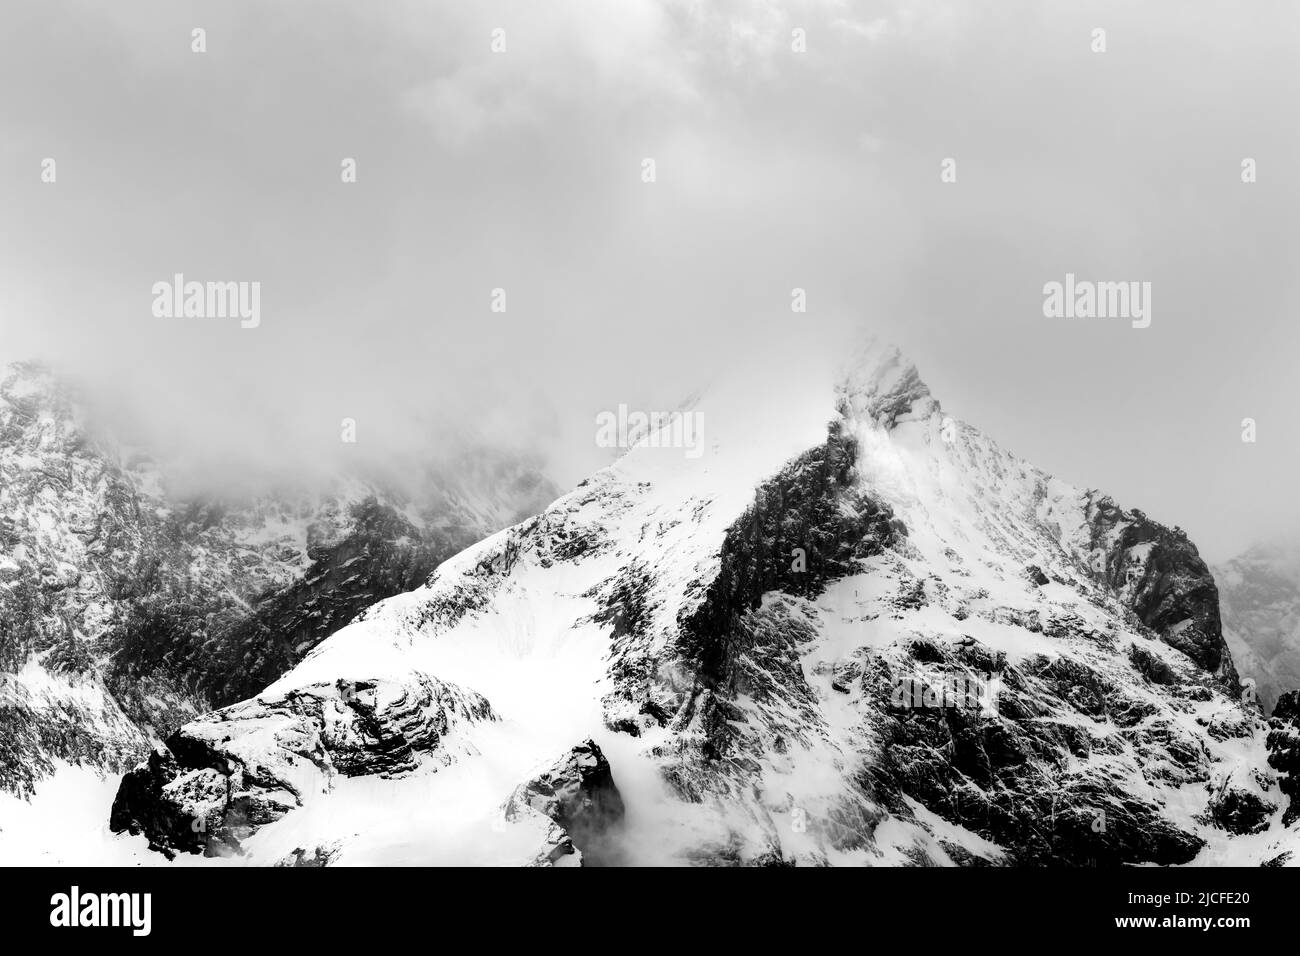 Bad weather with snow and dense clouds with fog at the Alpspitze above Garmisch-Partenkirchen. Seen from Krün. Stock Photo